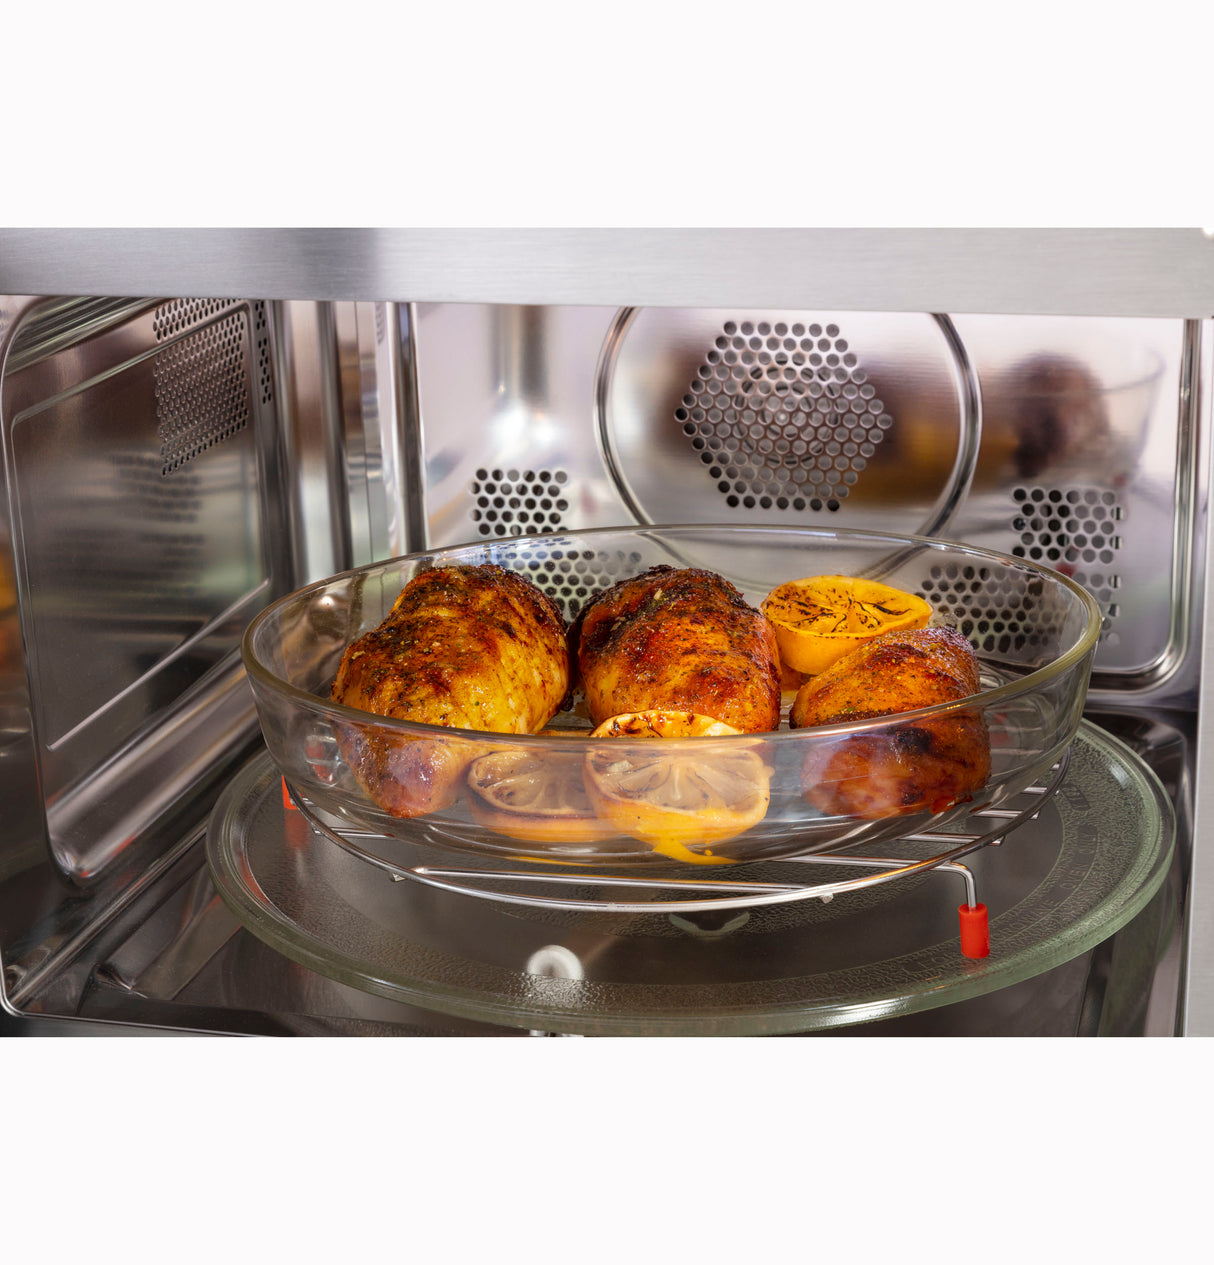 GE(R) 1.0 Cu. Ft. Capacity Countertop Convection Microwave Oven with Air Fry - (JES1109RRSS)